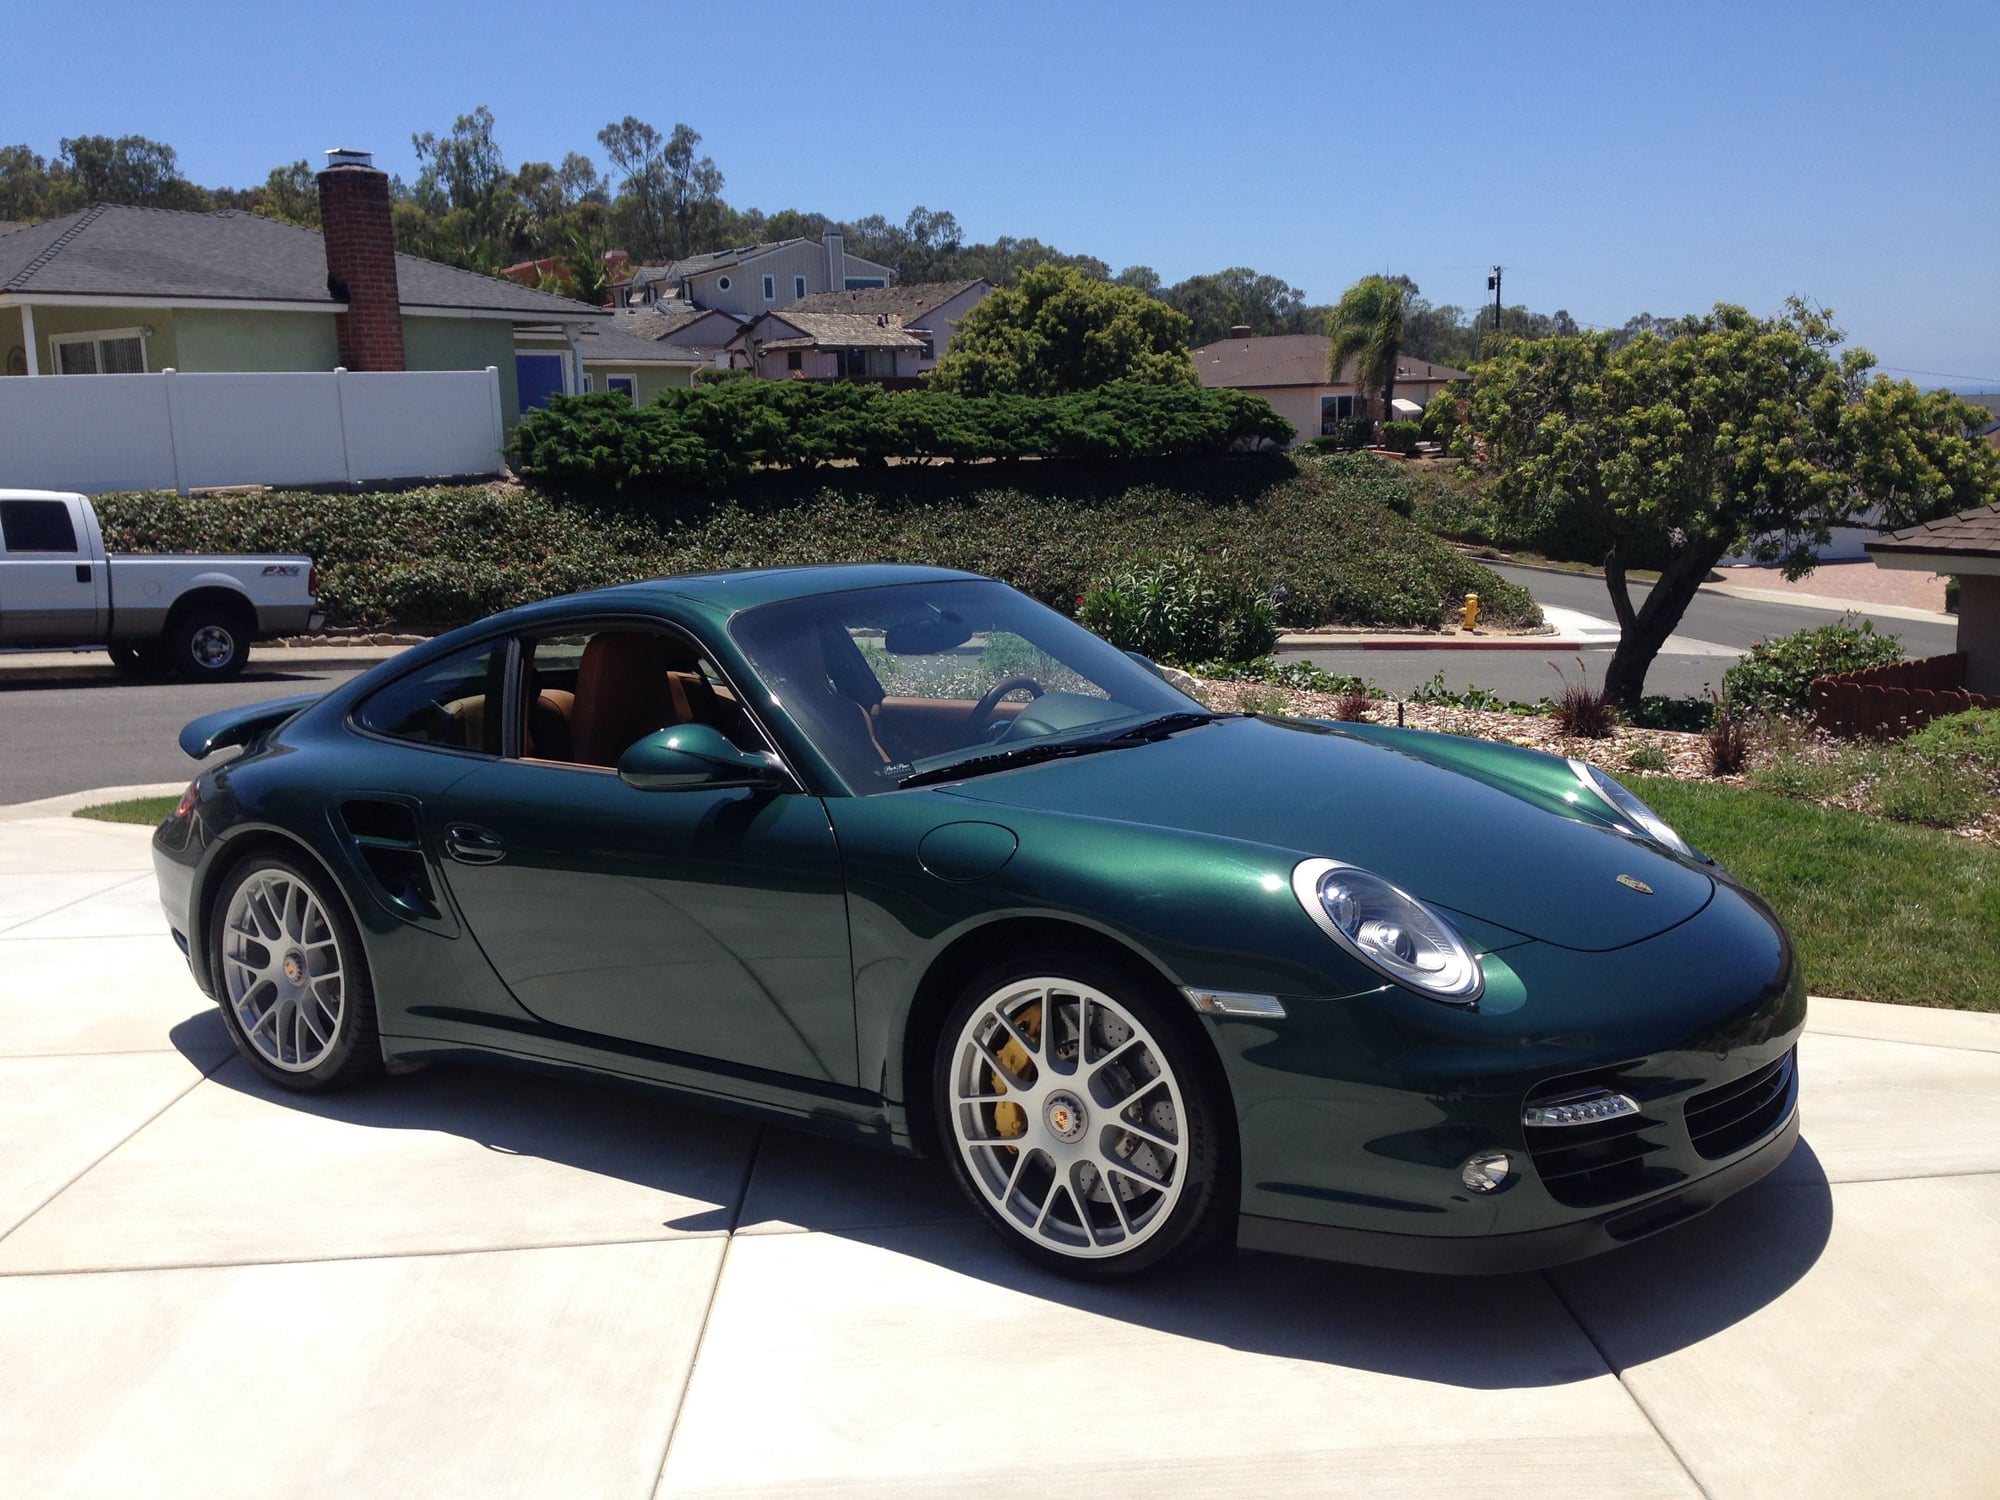 2011 Porsche 911 - 2011 997.2 Turbo S - Used - VIN WP0AD2A98BS766843 - 19,180 Miles - 6 cyl - AWD - Automatic - Coupe - Other - Redondo Beach, CA 90277, United States